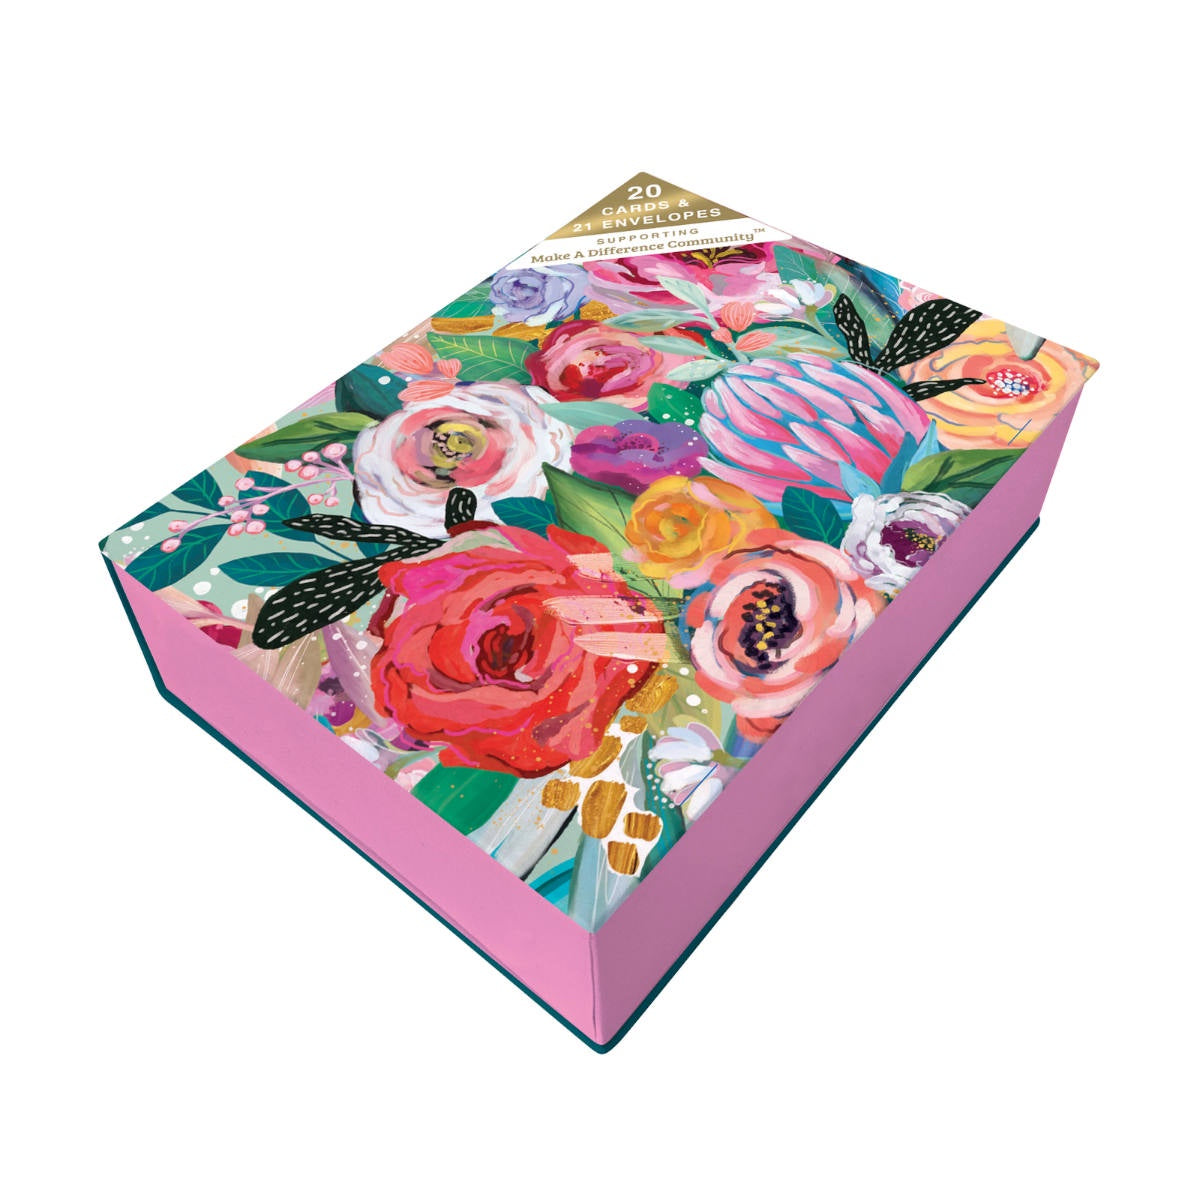 Diesel and Dutch Greeting Card Box Set - Inflorescence